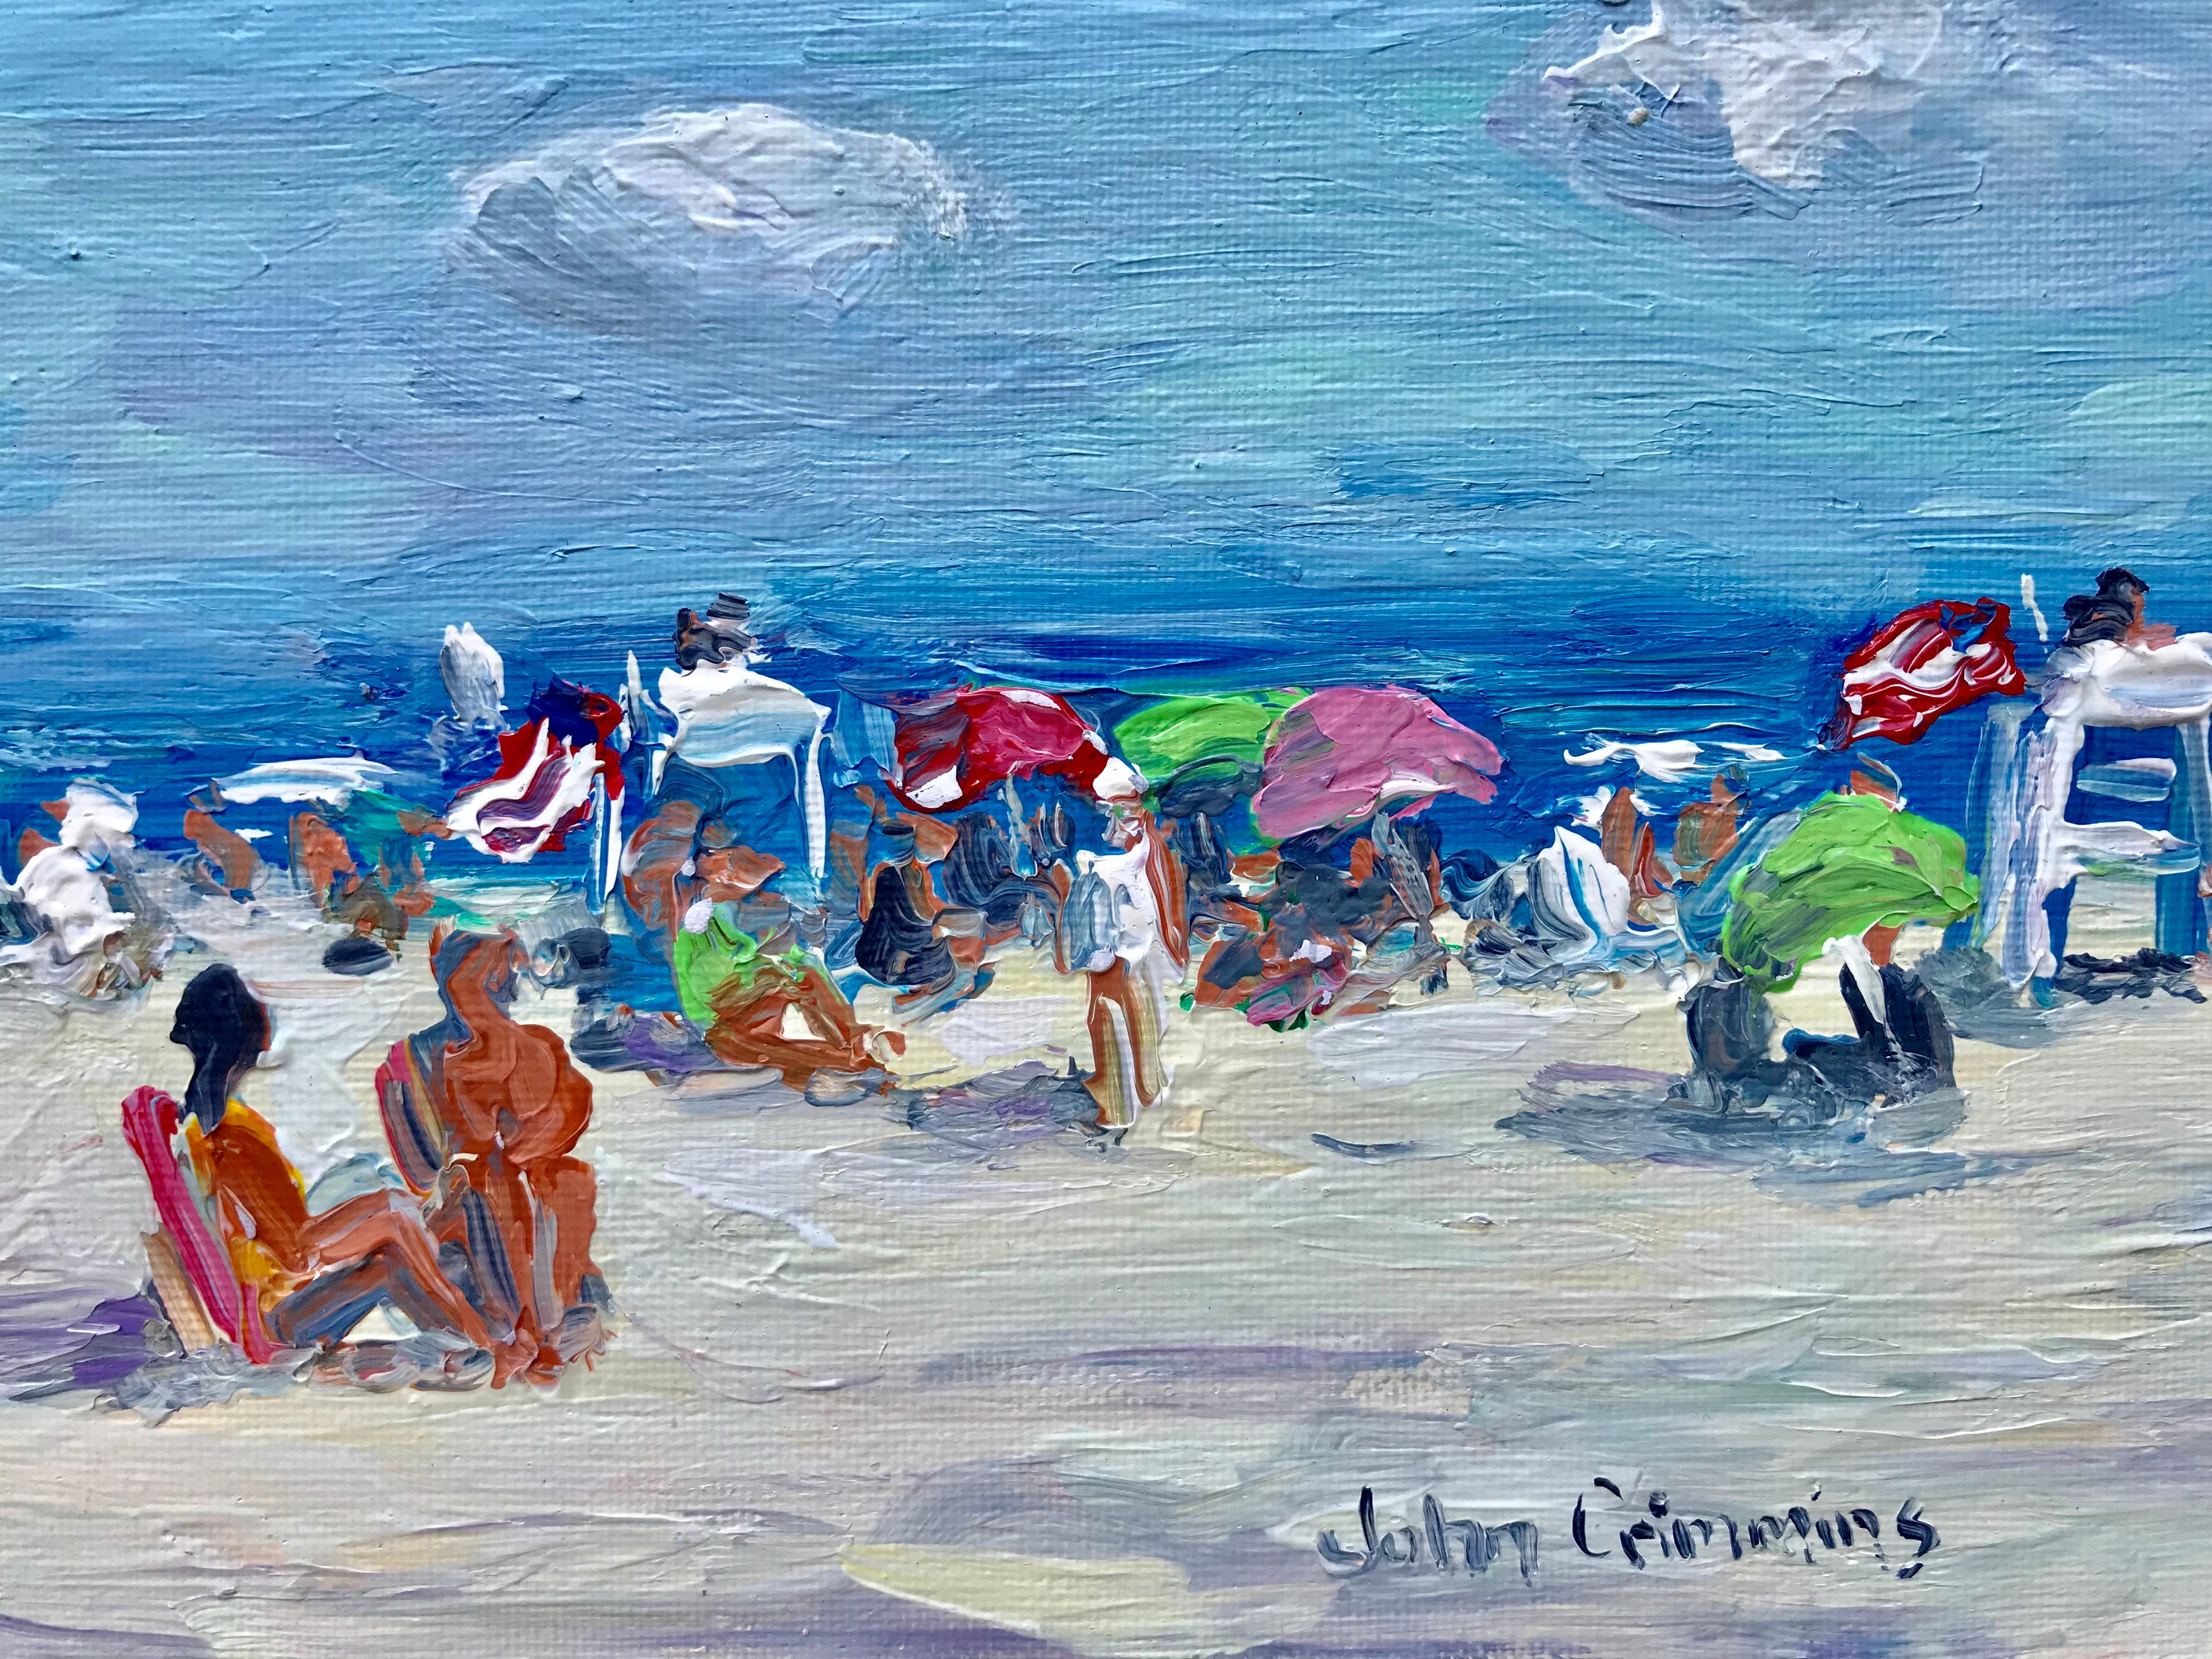 “Beach Day” - Painting by John Crimmins